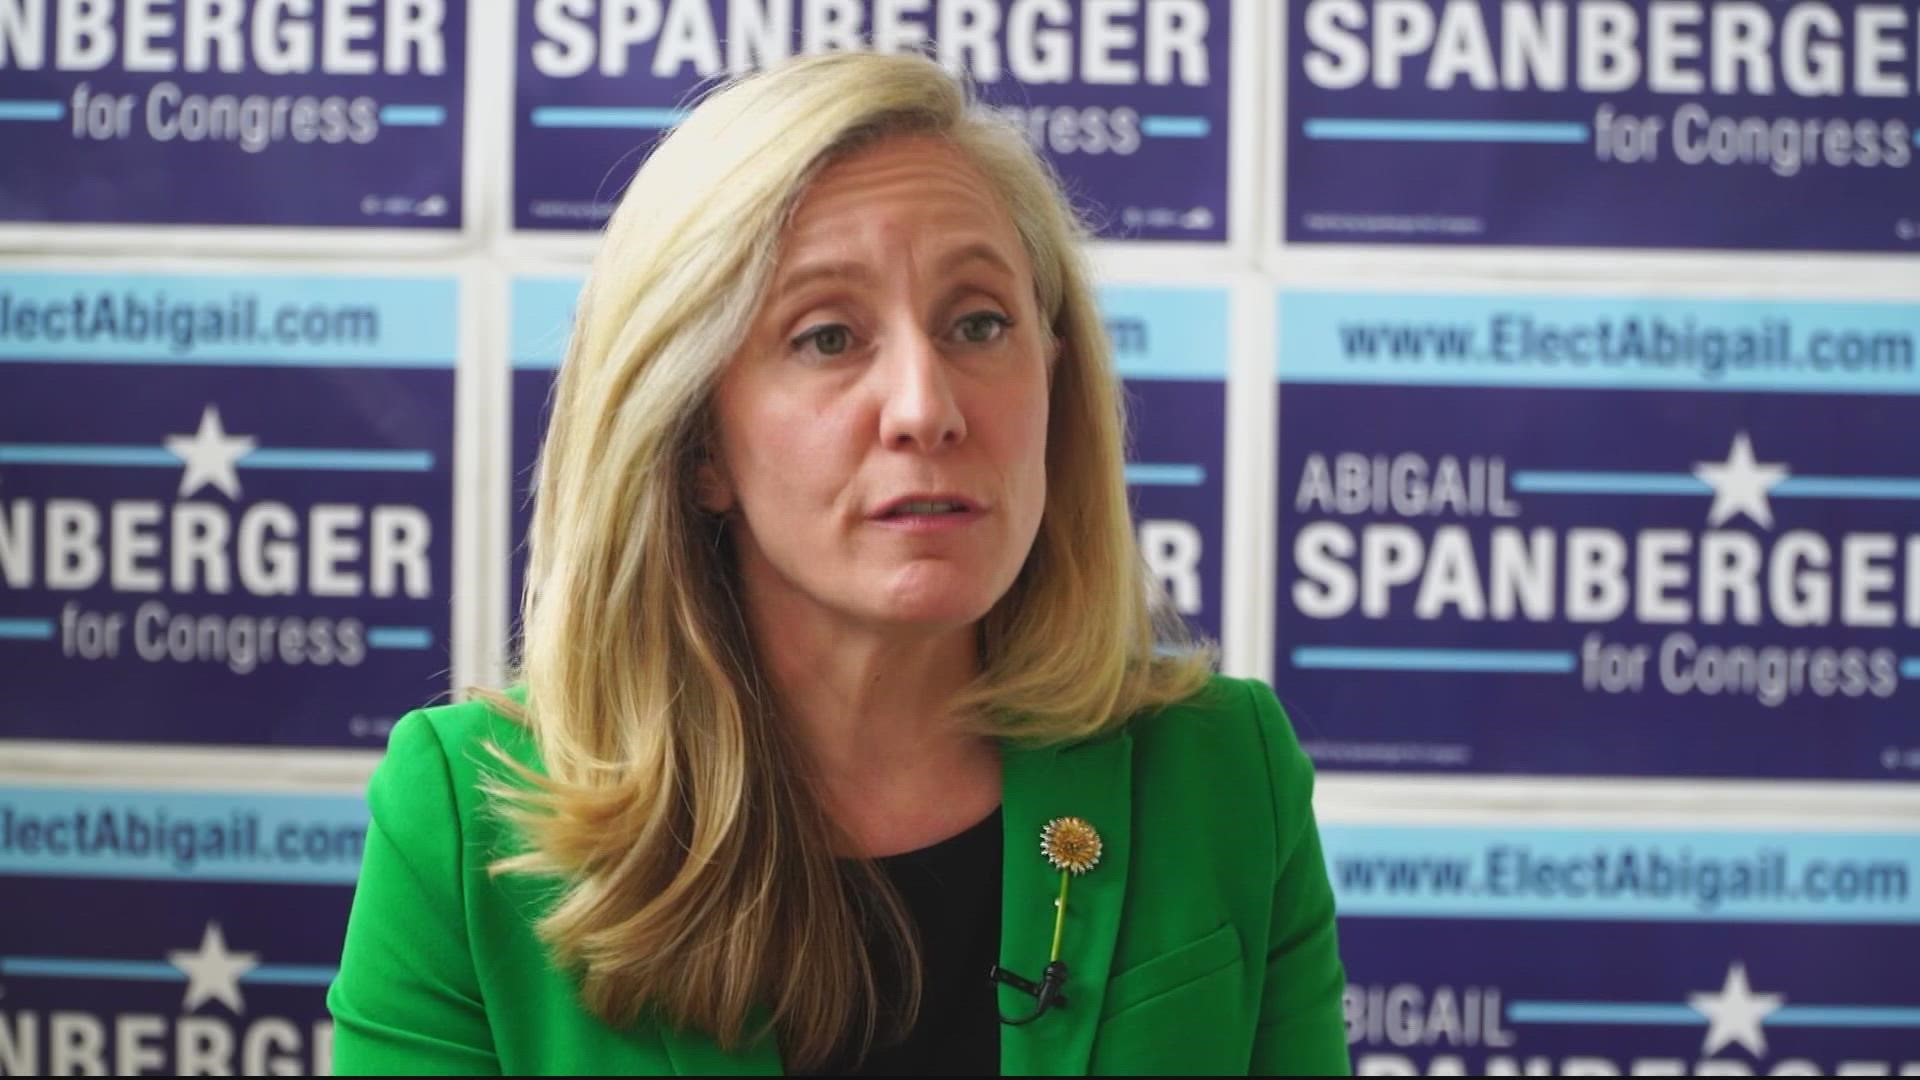 WUSA9 spoke with Spanberger at her campaign headquarters in Fredericksburg.